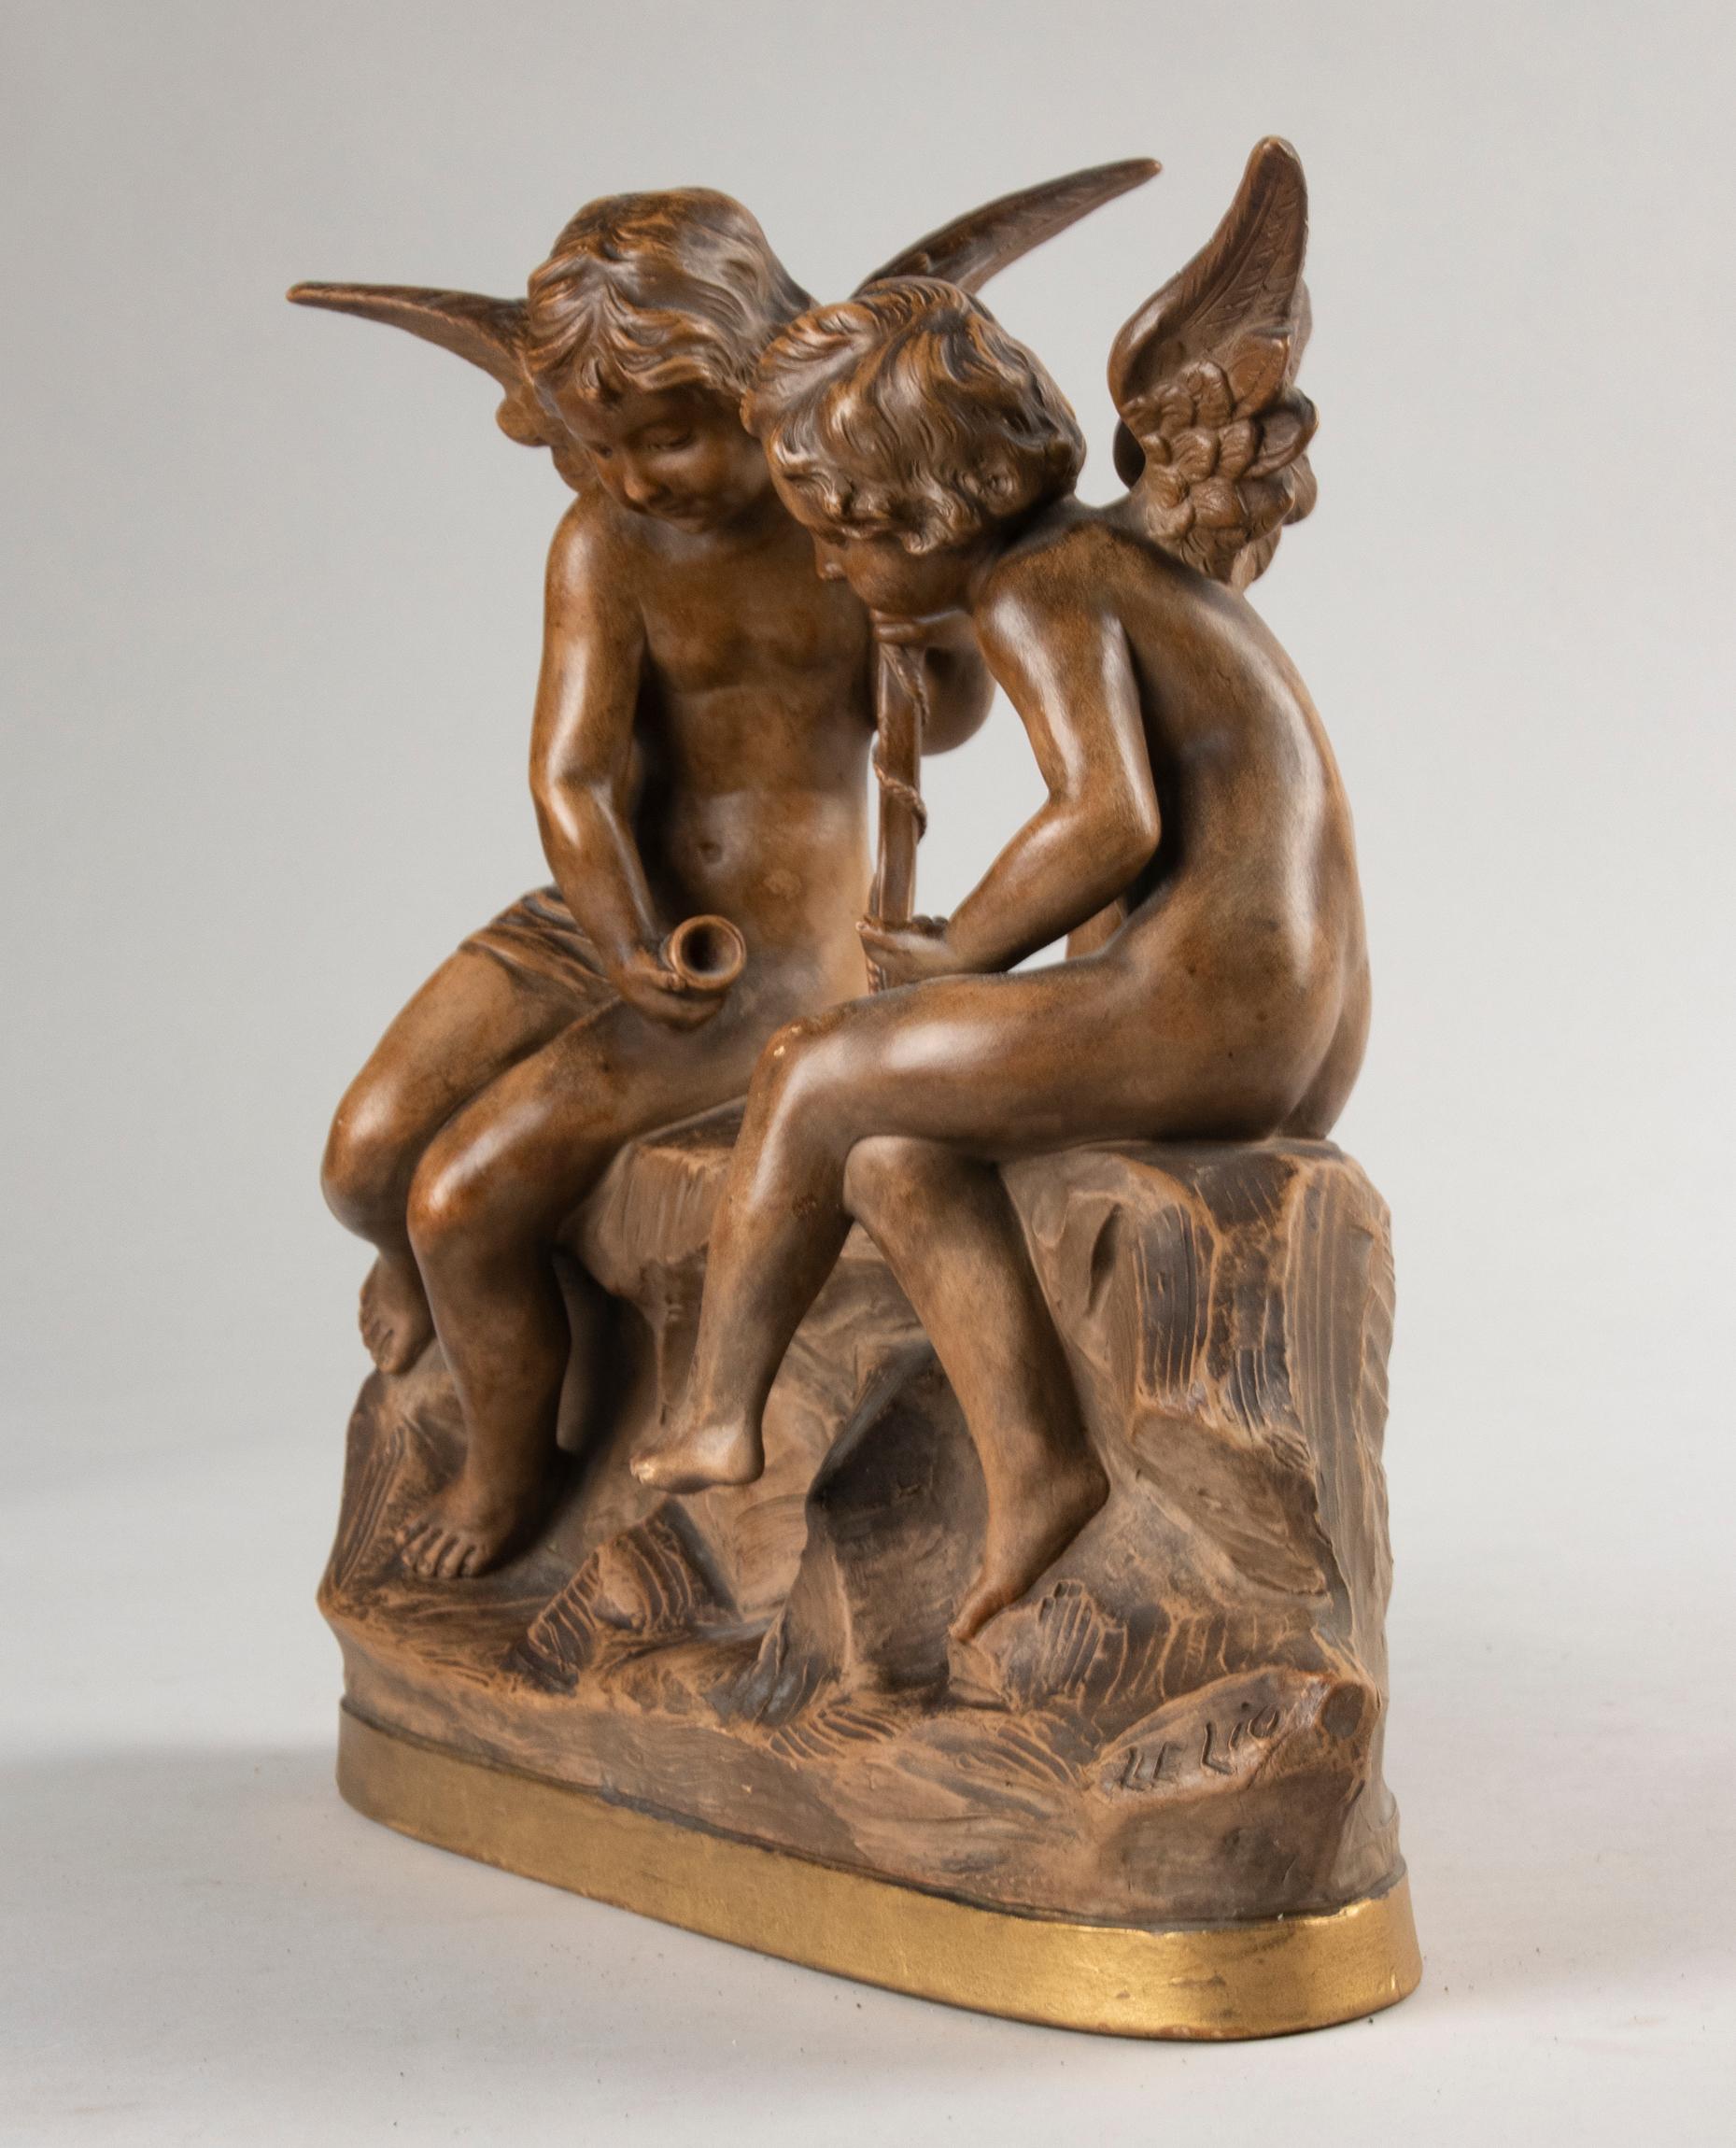 19th Century Terracotta Statue by LE LIO Putti Playing Dice 4